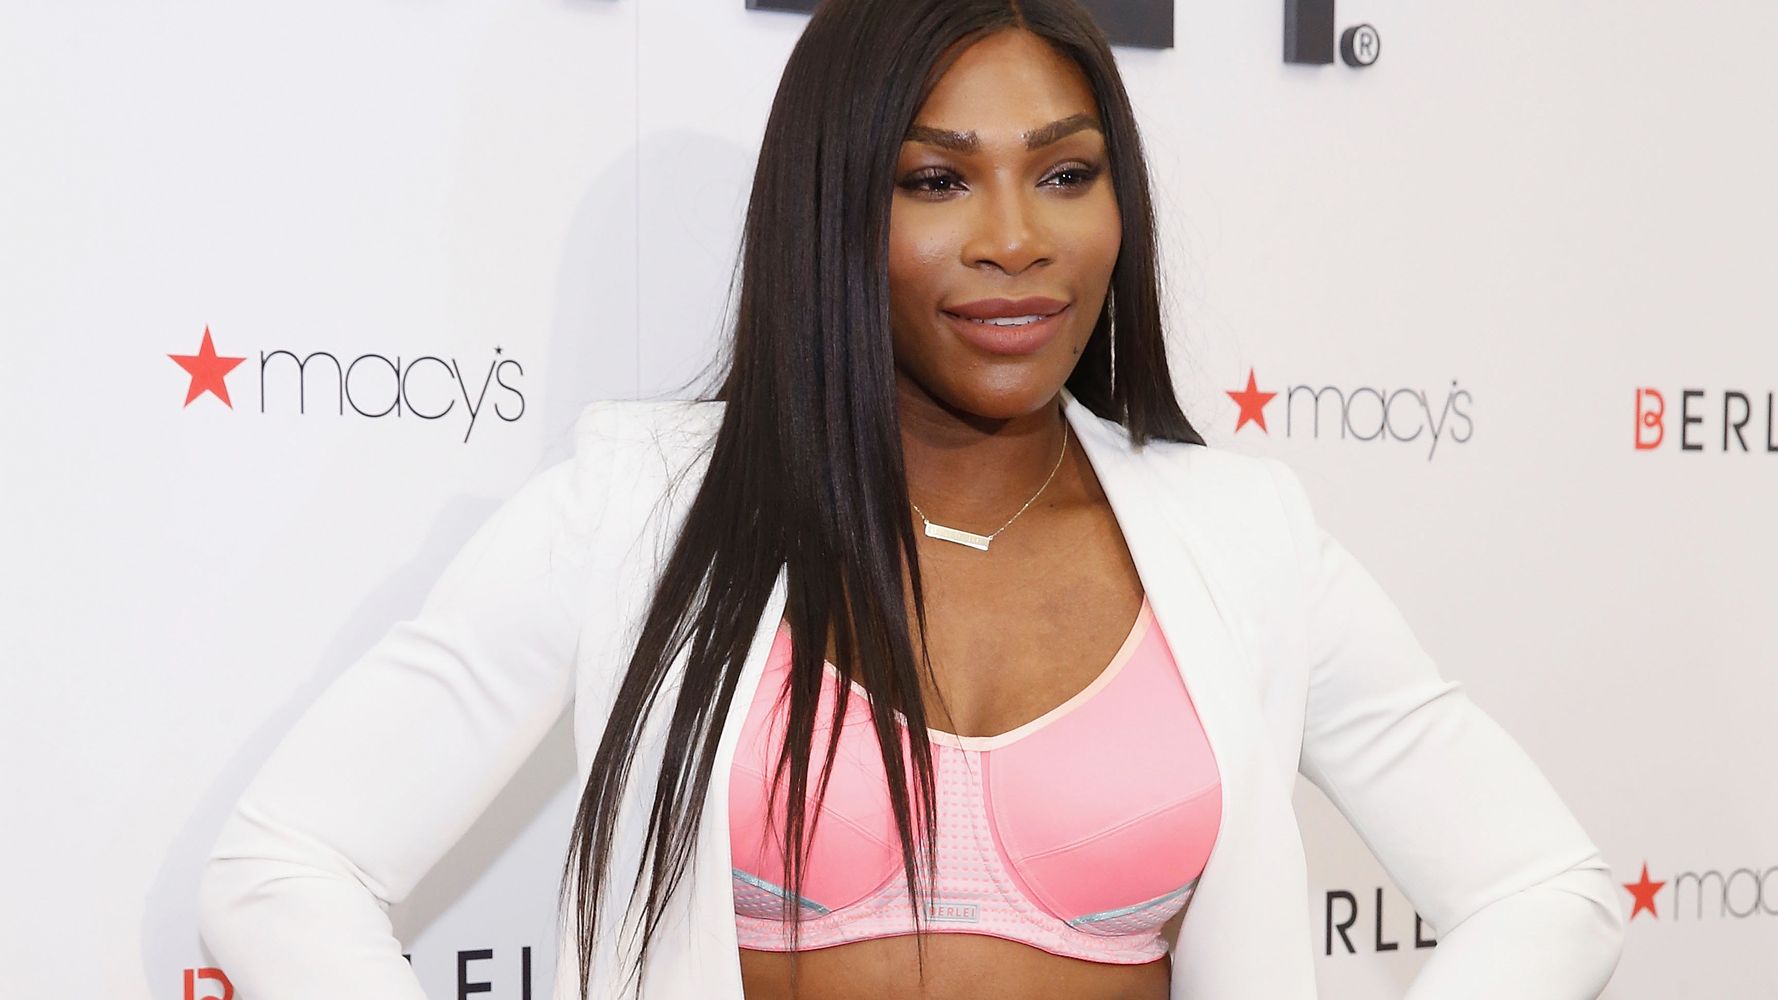 Serena Williams wore a pink sports bra on the red carpet, proves